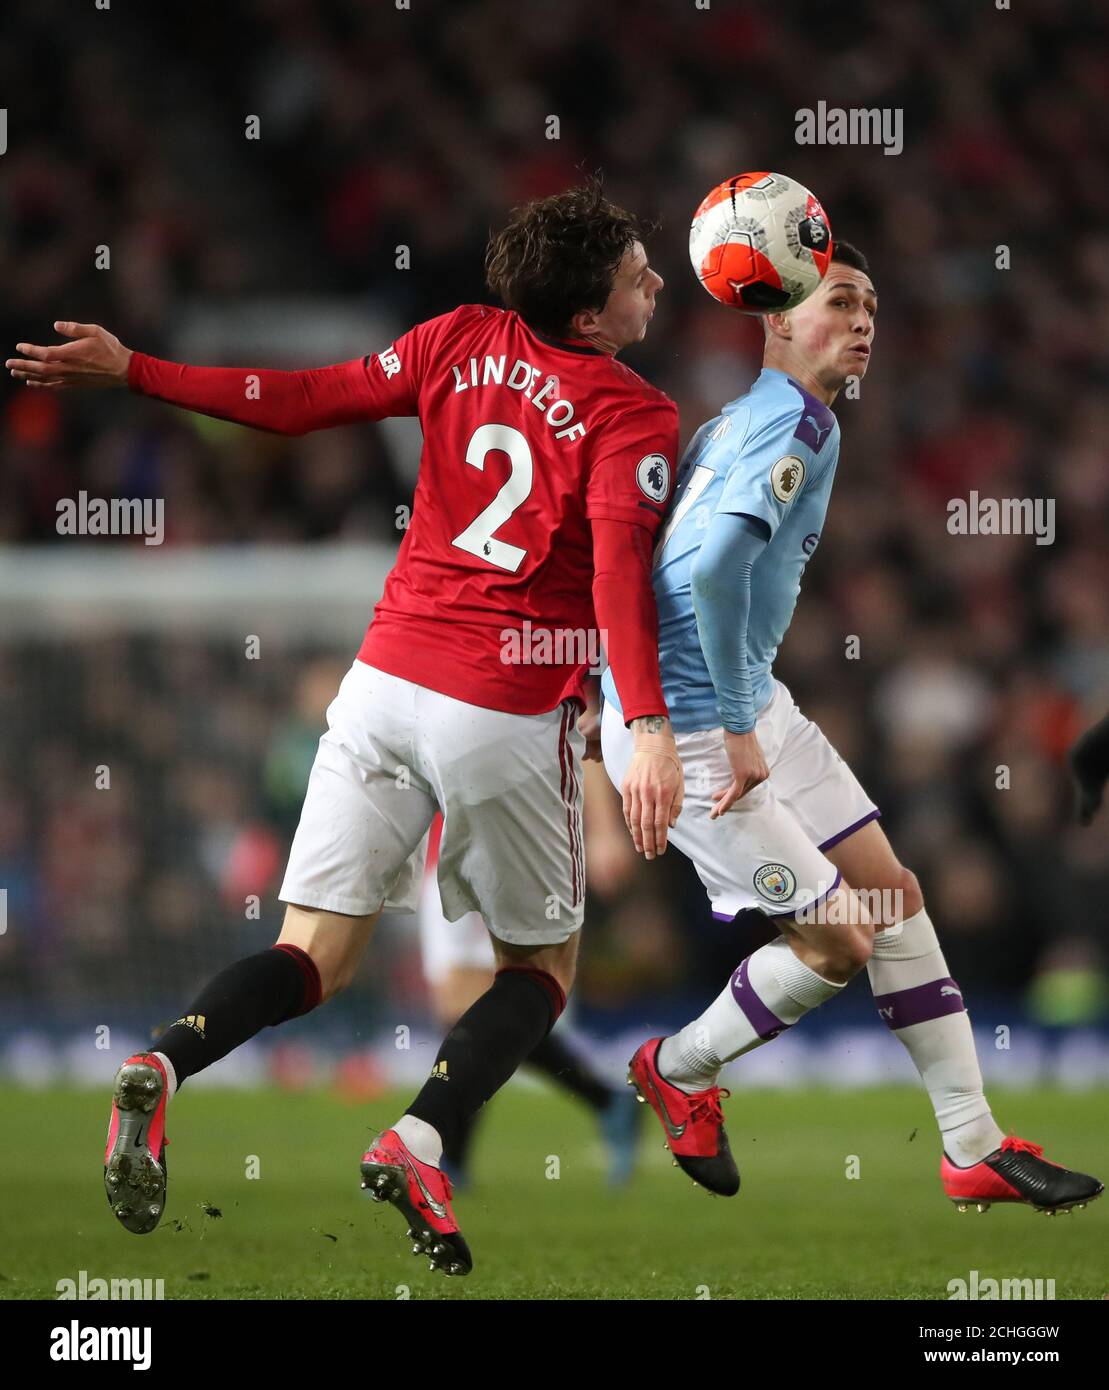 Manchester City's Phil Foden battles to win the ball off Manchester United's Victor Lindelof during the Premier League match at Old Trafford, Manchester. Stock Photo